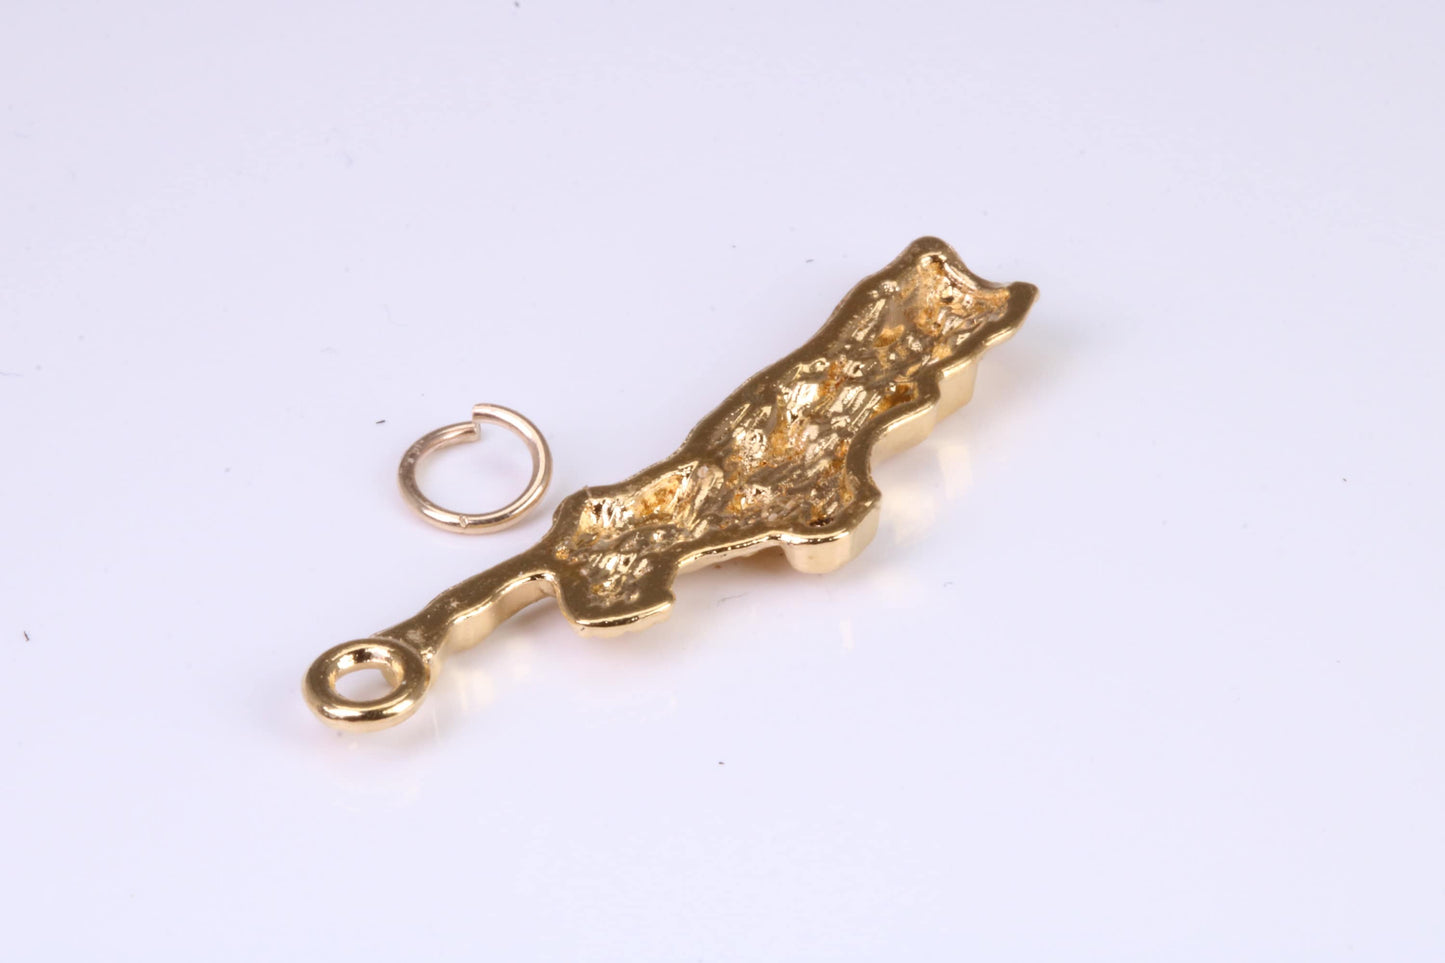 Statue of Liberty Charm, Traditional Charm, Made from Solid Yellow Gold, British Hallmarked, Complete with Attachment Link